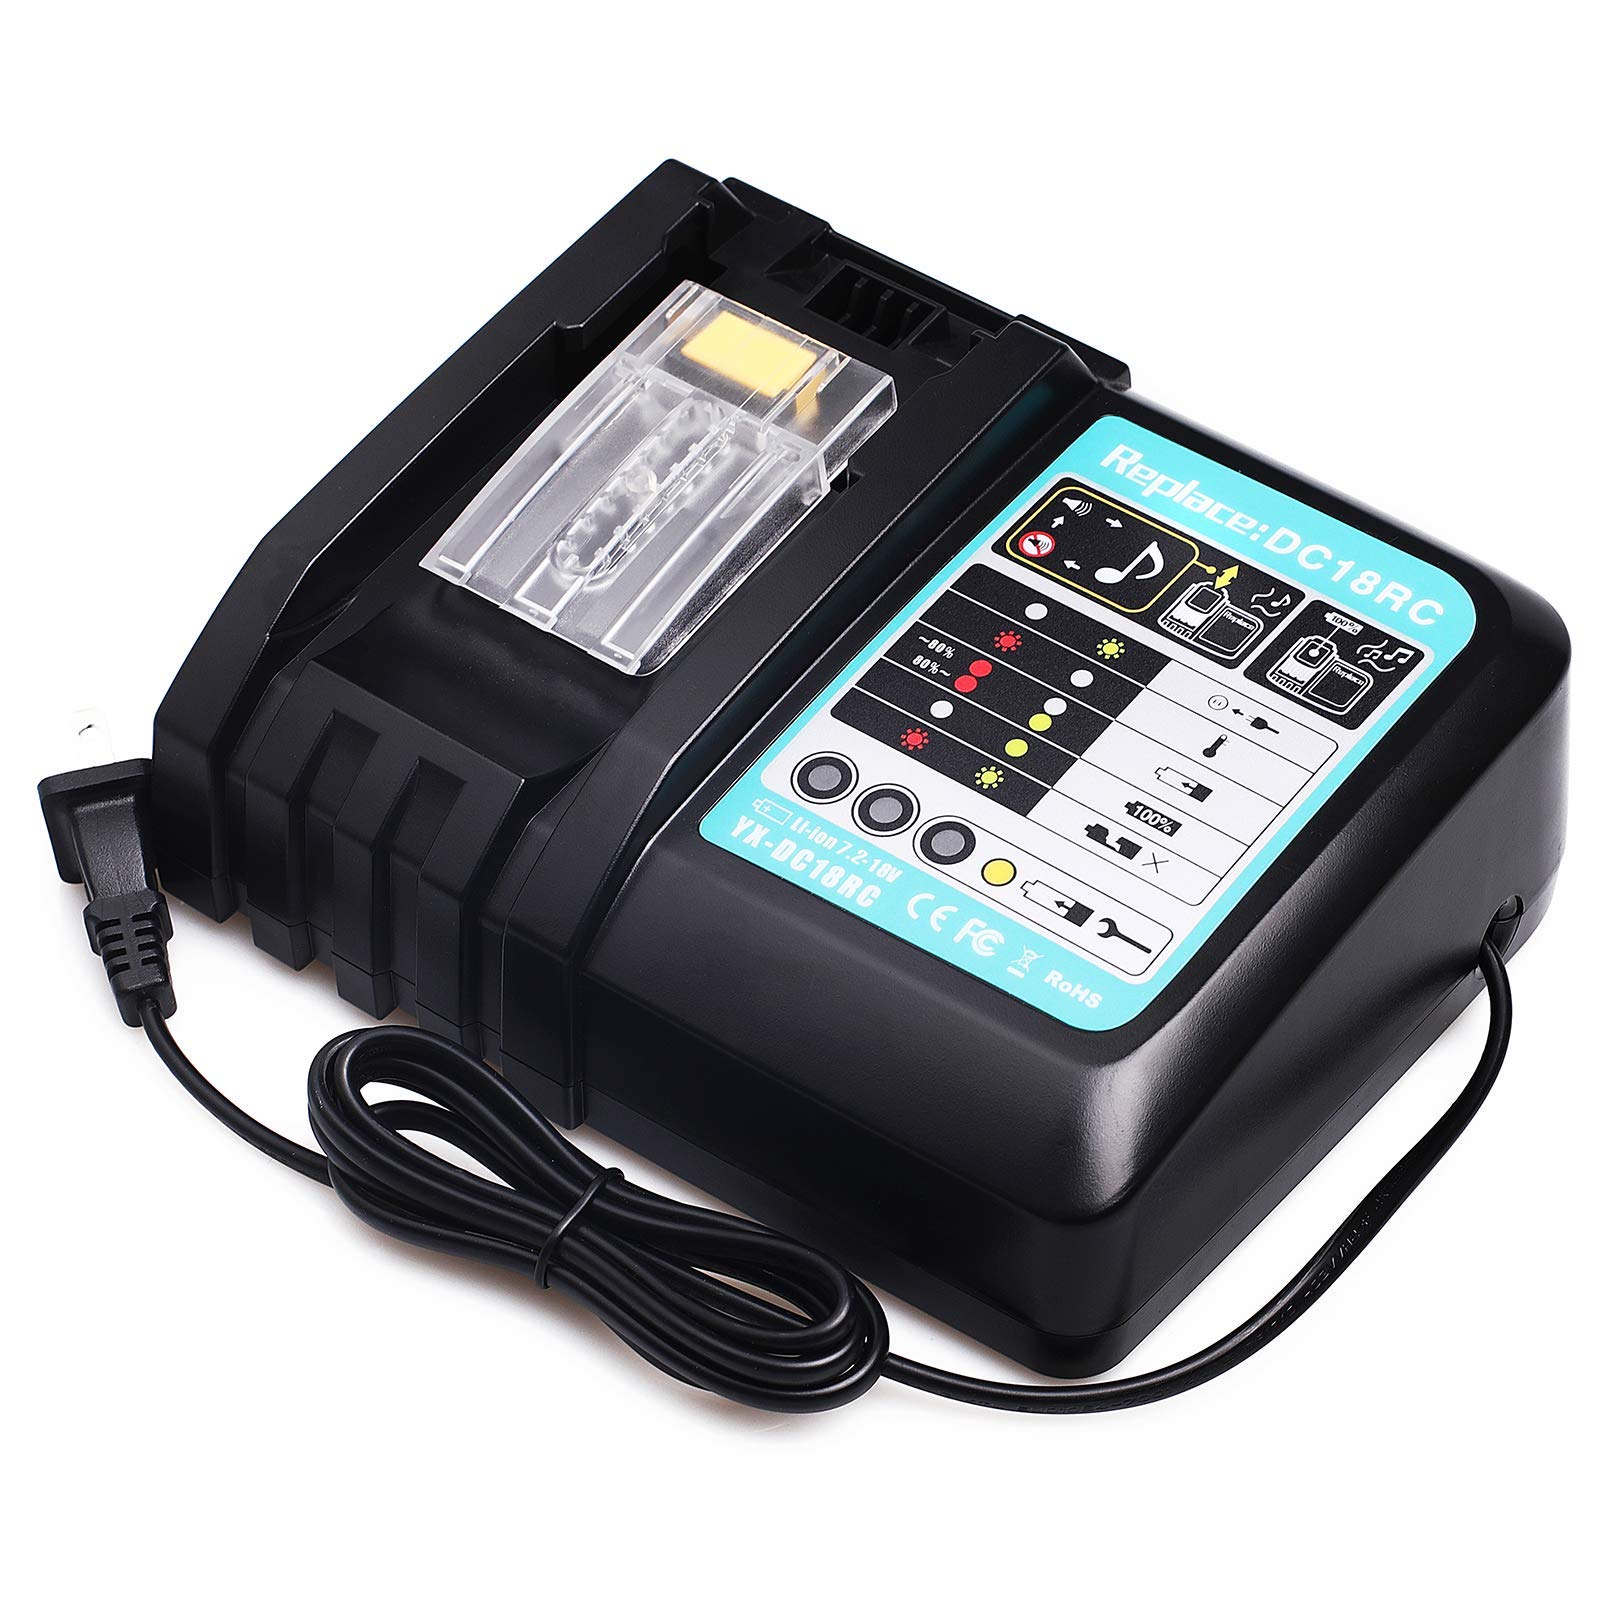 Lilocaja DC18RC 18V 3.0A Rapid Battery Charger for All Makita 14.4V-18V LXT Lithium-Ion Battery BL1860 BL1850 BL1840 BL1830 BL1450 BL1440 BL1430, Replaces for Makita Charger DC18RD DC18RA DC18SF